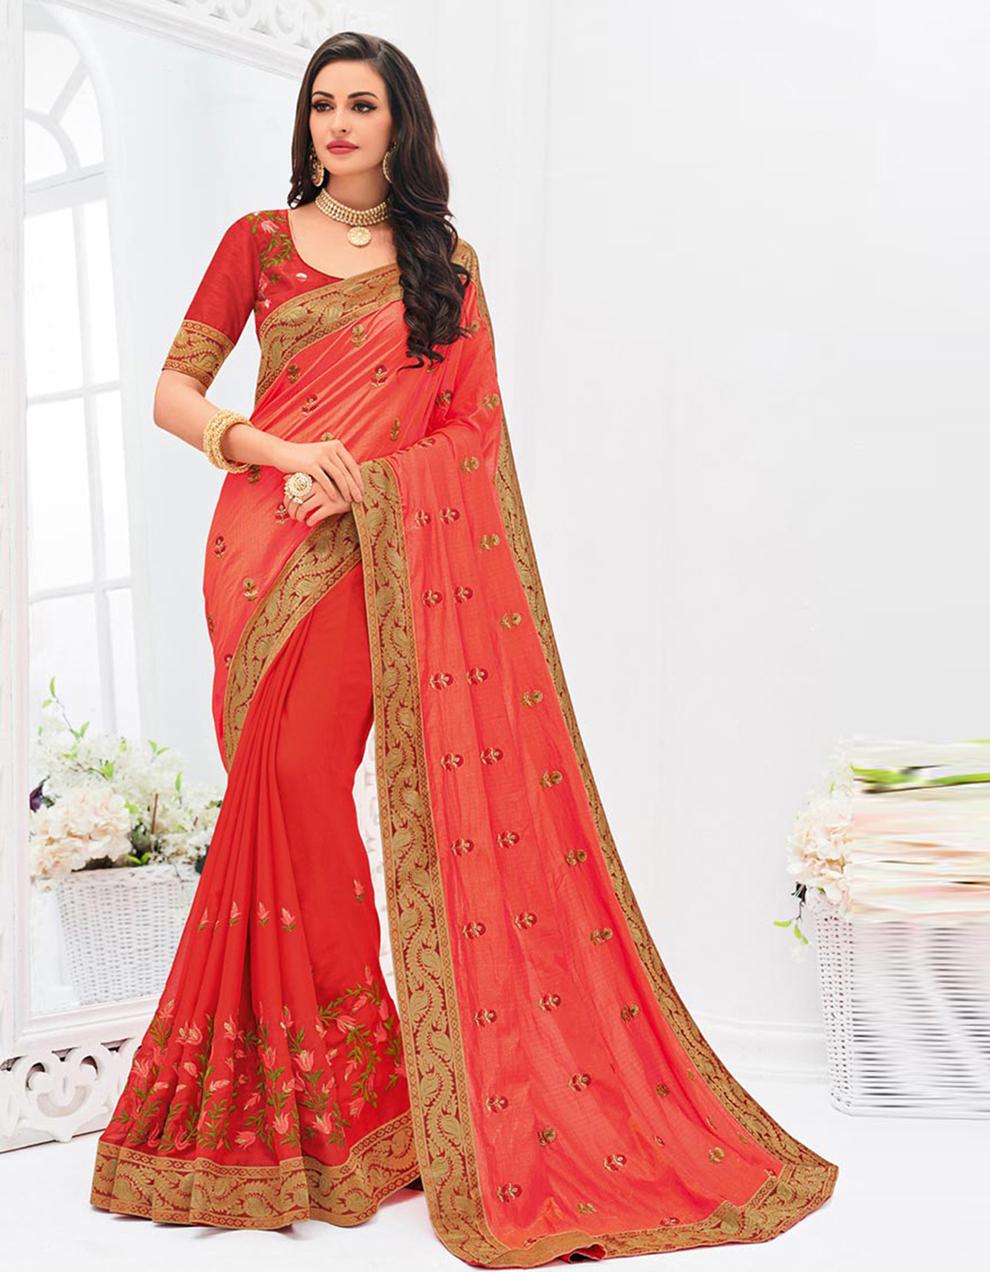 Red Two Tone Silk And Moss Chiffon Half and Half Saree With Blouse IW19758